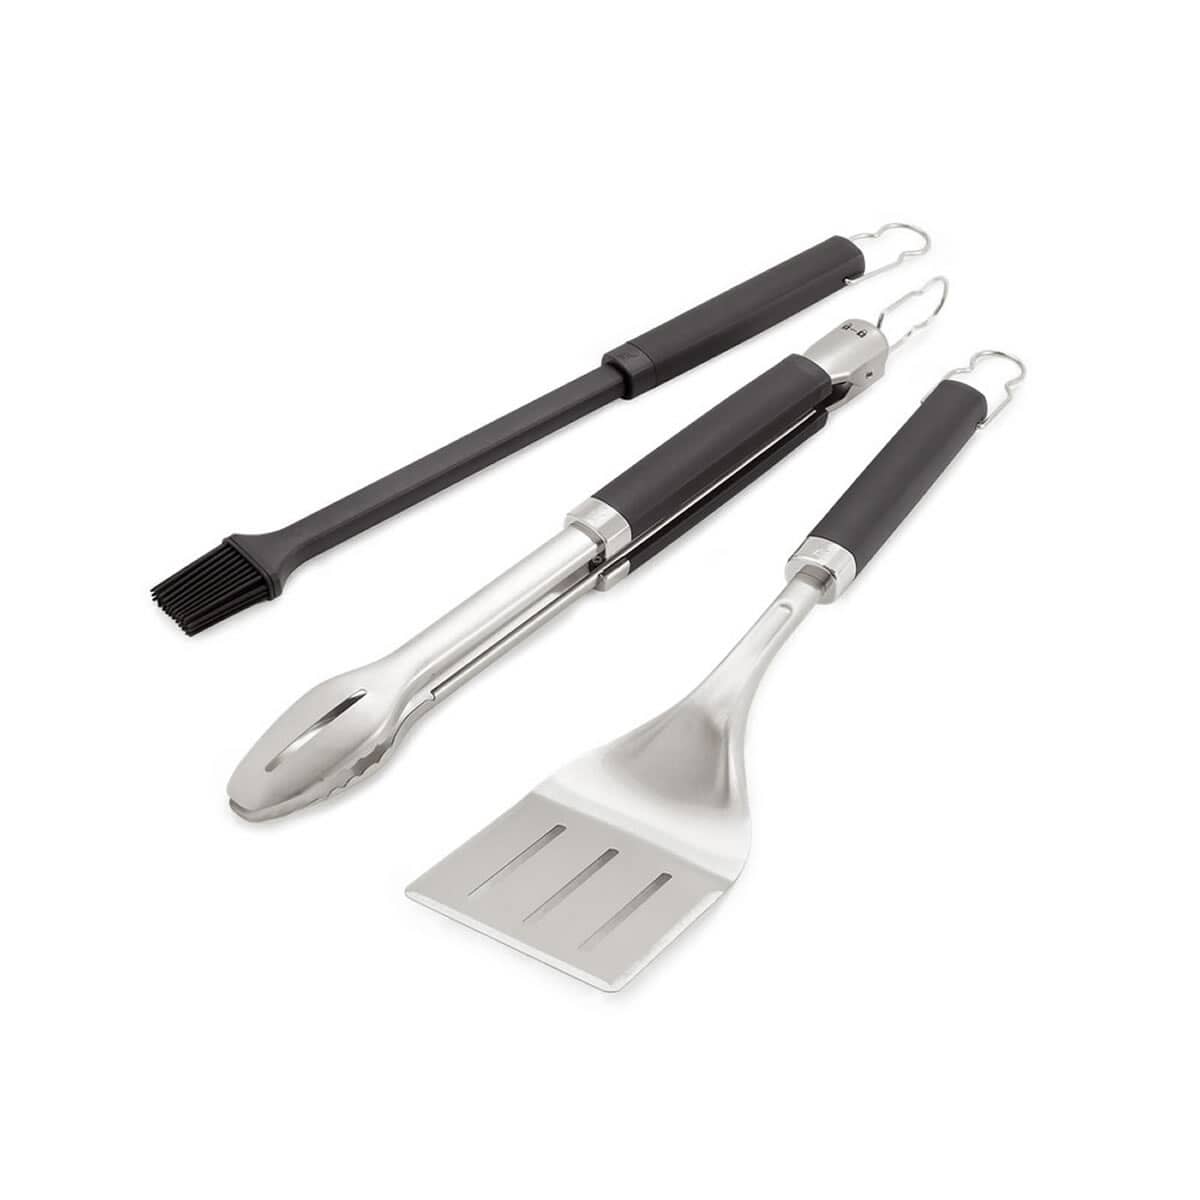 Weber Stainless Steel Grill Tool Set Spatula Tongs Fork Cooking Utensils 3 Piece 